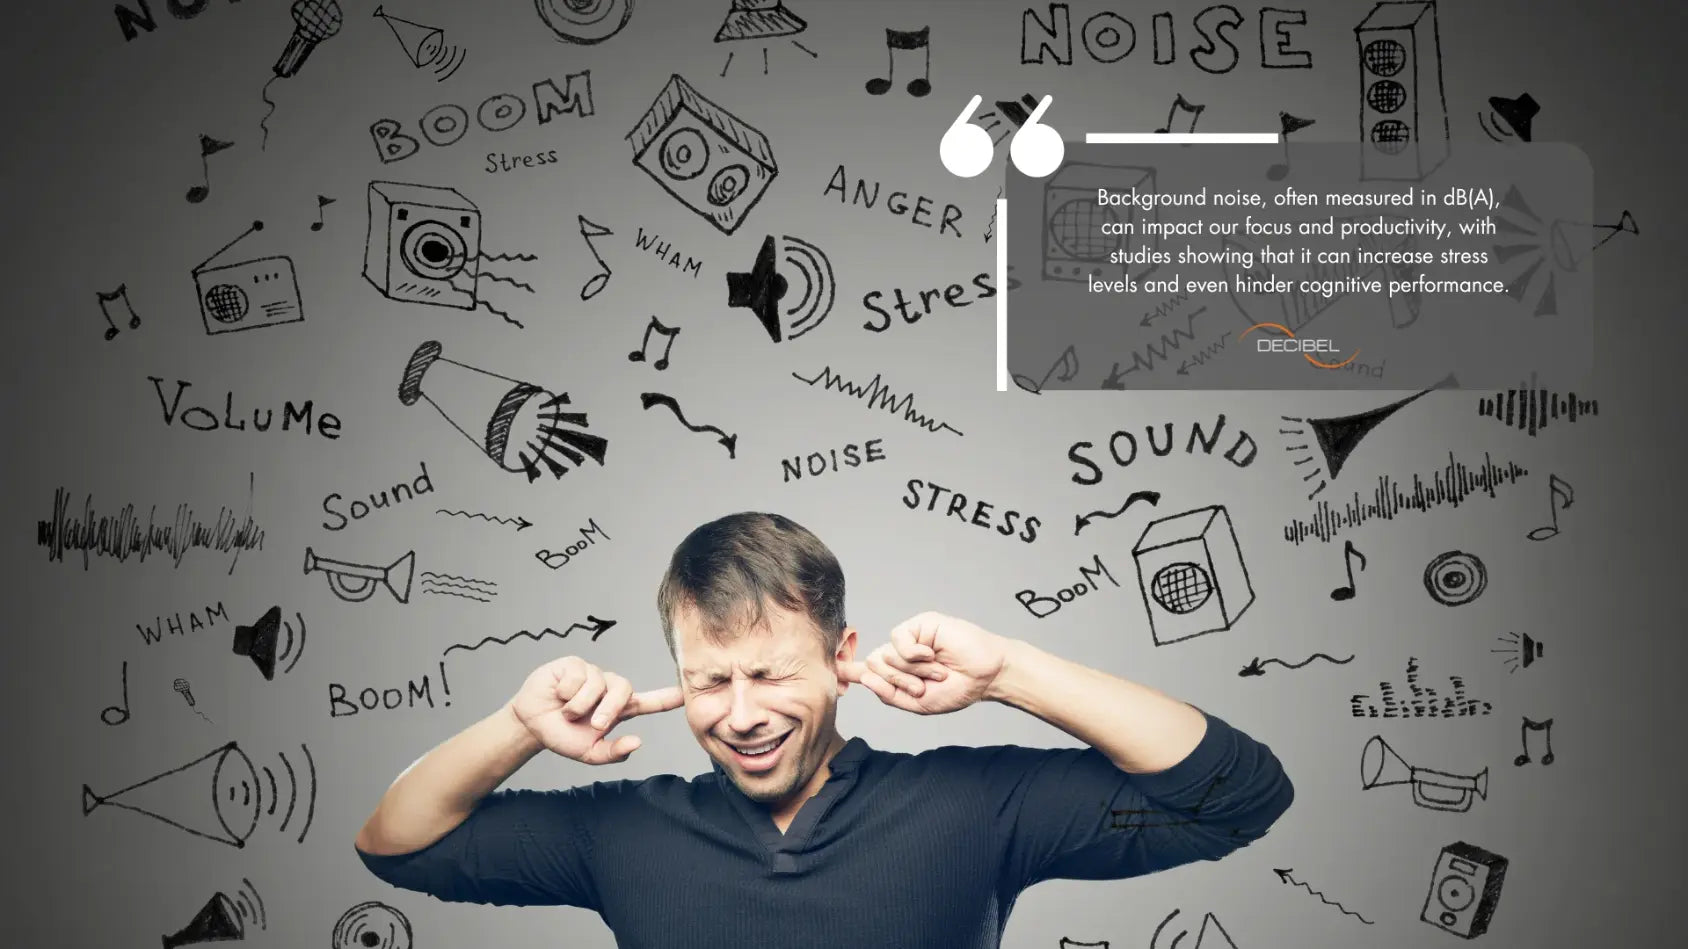 How-to-Soundproof-your-Home-Office-blog-post-DECIBEL-man-graffiti-wall